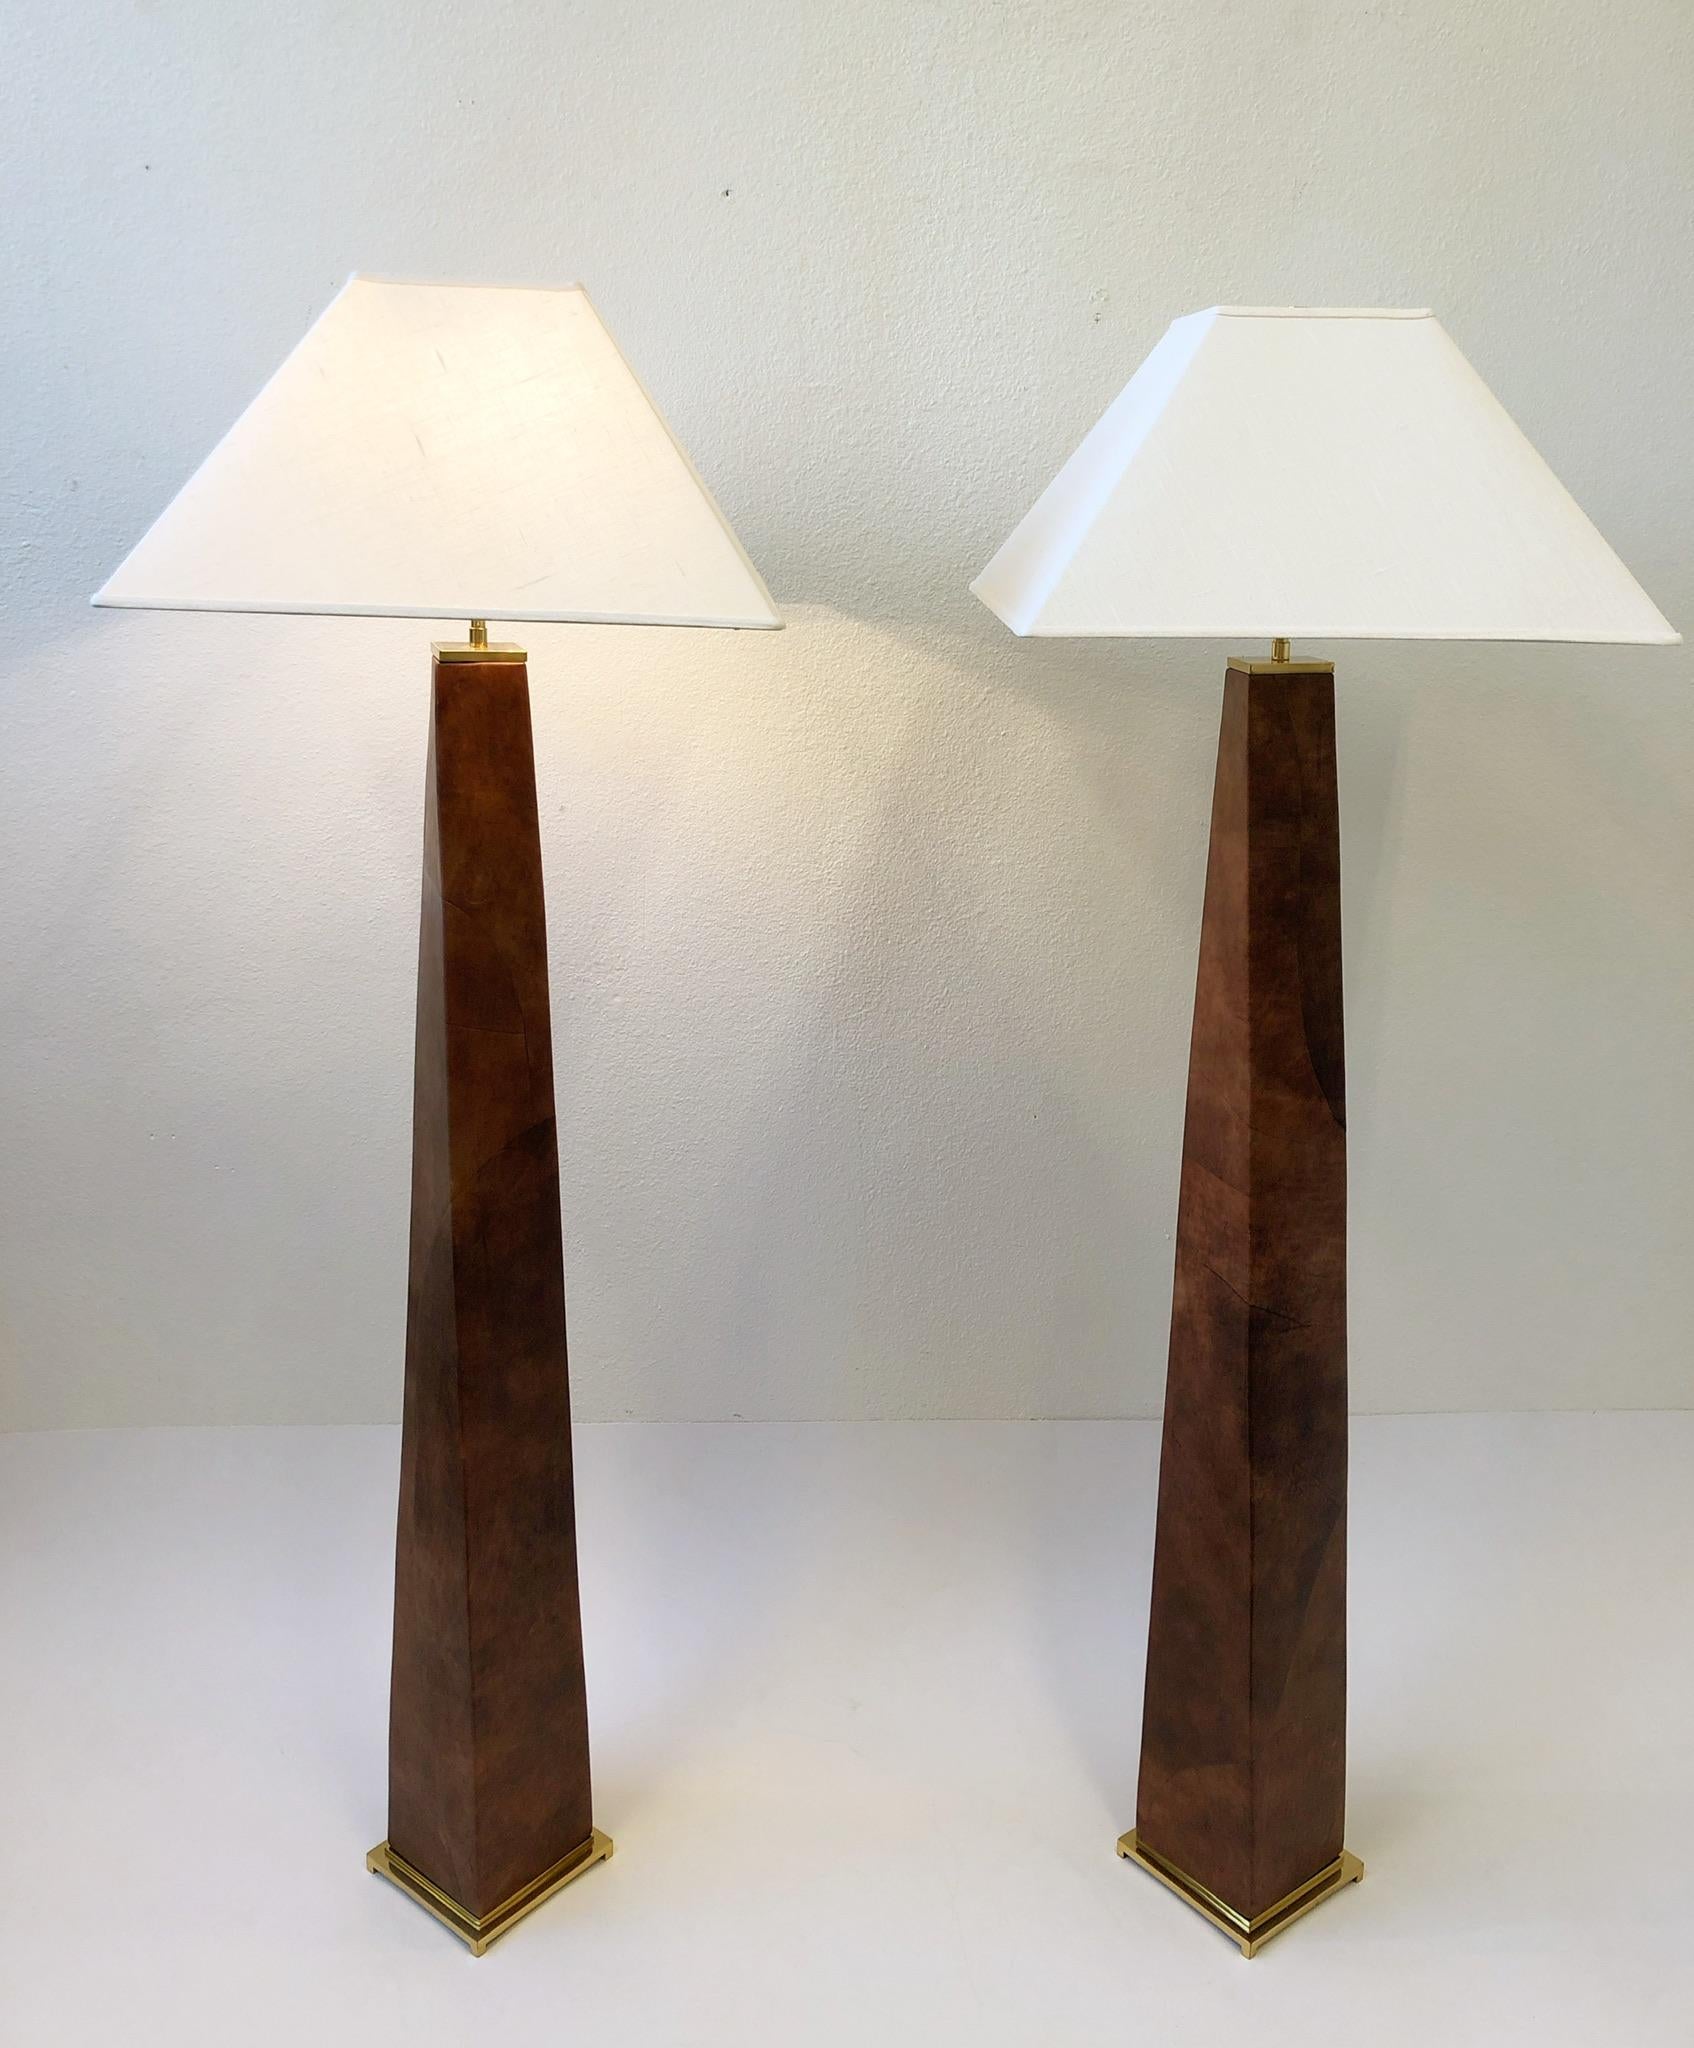 A spectacular pair of 1980’s polish brass and leather J.M.F. floor lamps by renowned American designer Karl Springer. The lamps are constructed of solid brass and wood that’s covered In a patchwork saddle tan leather. New rewired and new vanilla